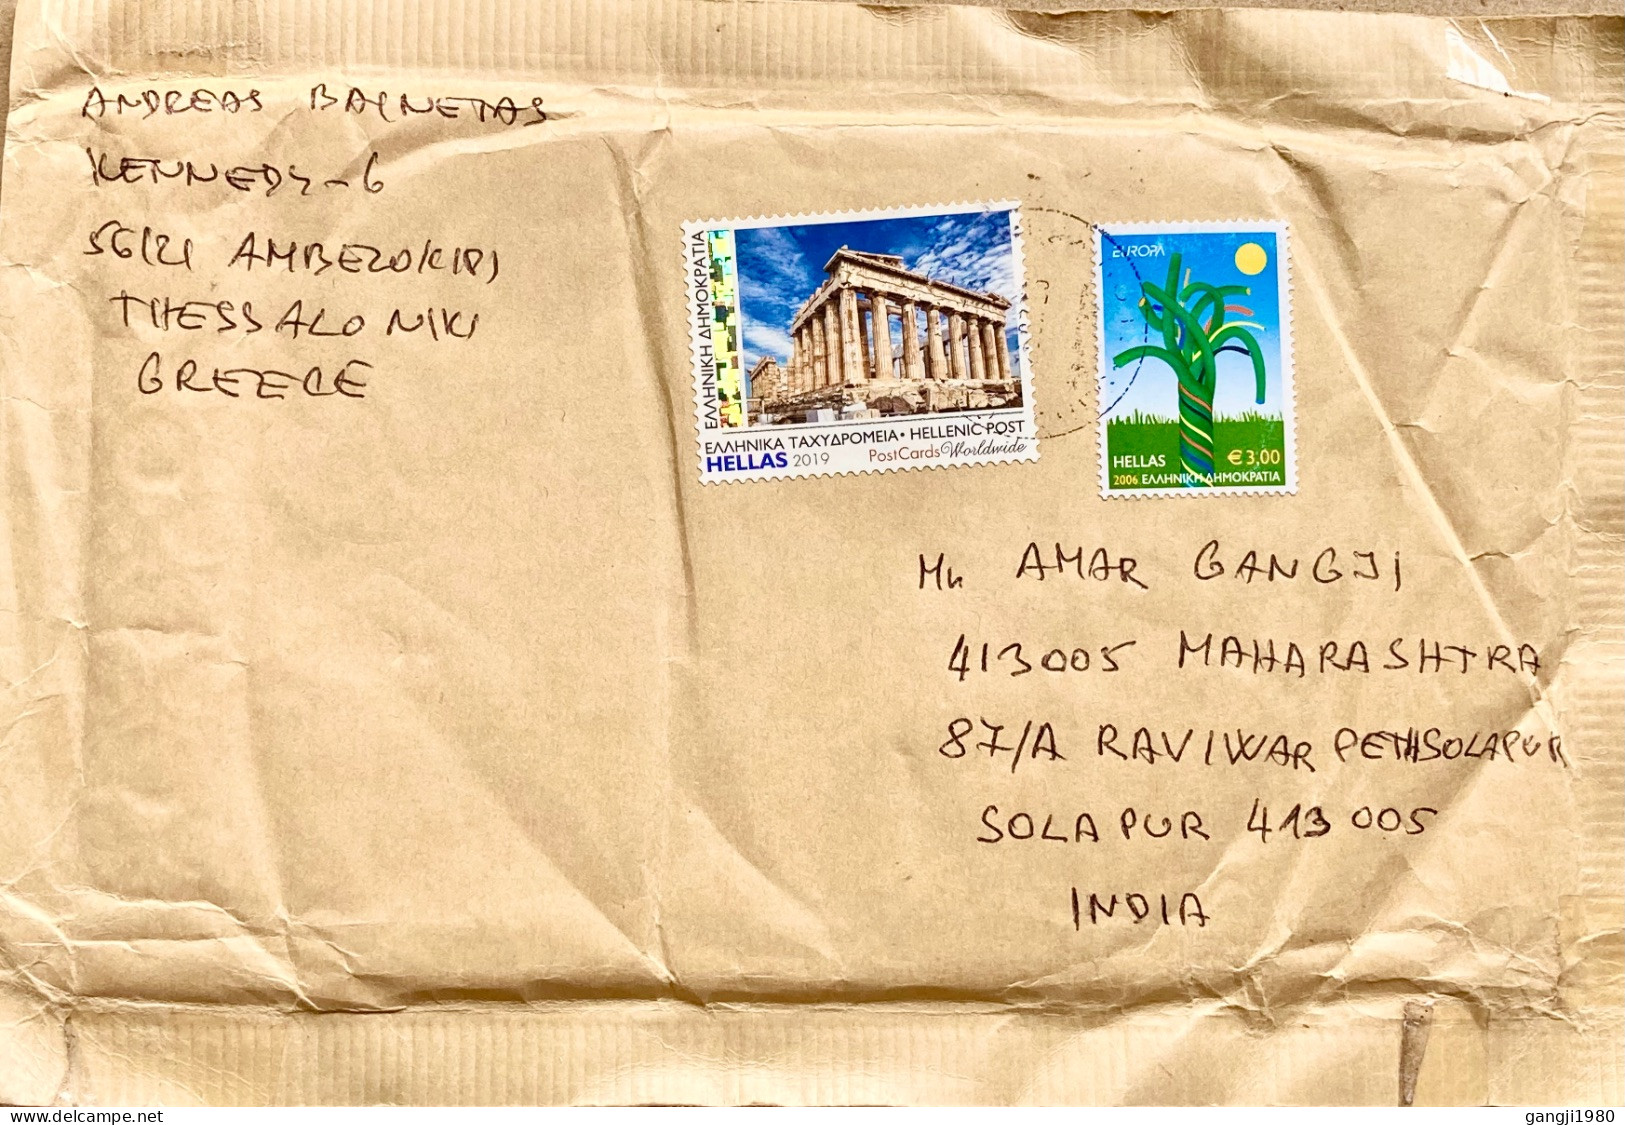 GREECE 2023, COVER USED INDIA, 2006 EUROPA, 2019 ARCHITECTURE, HERITAGE, STAMP FOR POSTCARD USED ON COVER, THESSALONIKI - Covers & Documents